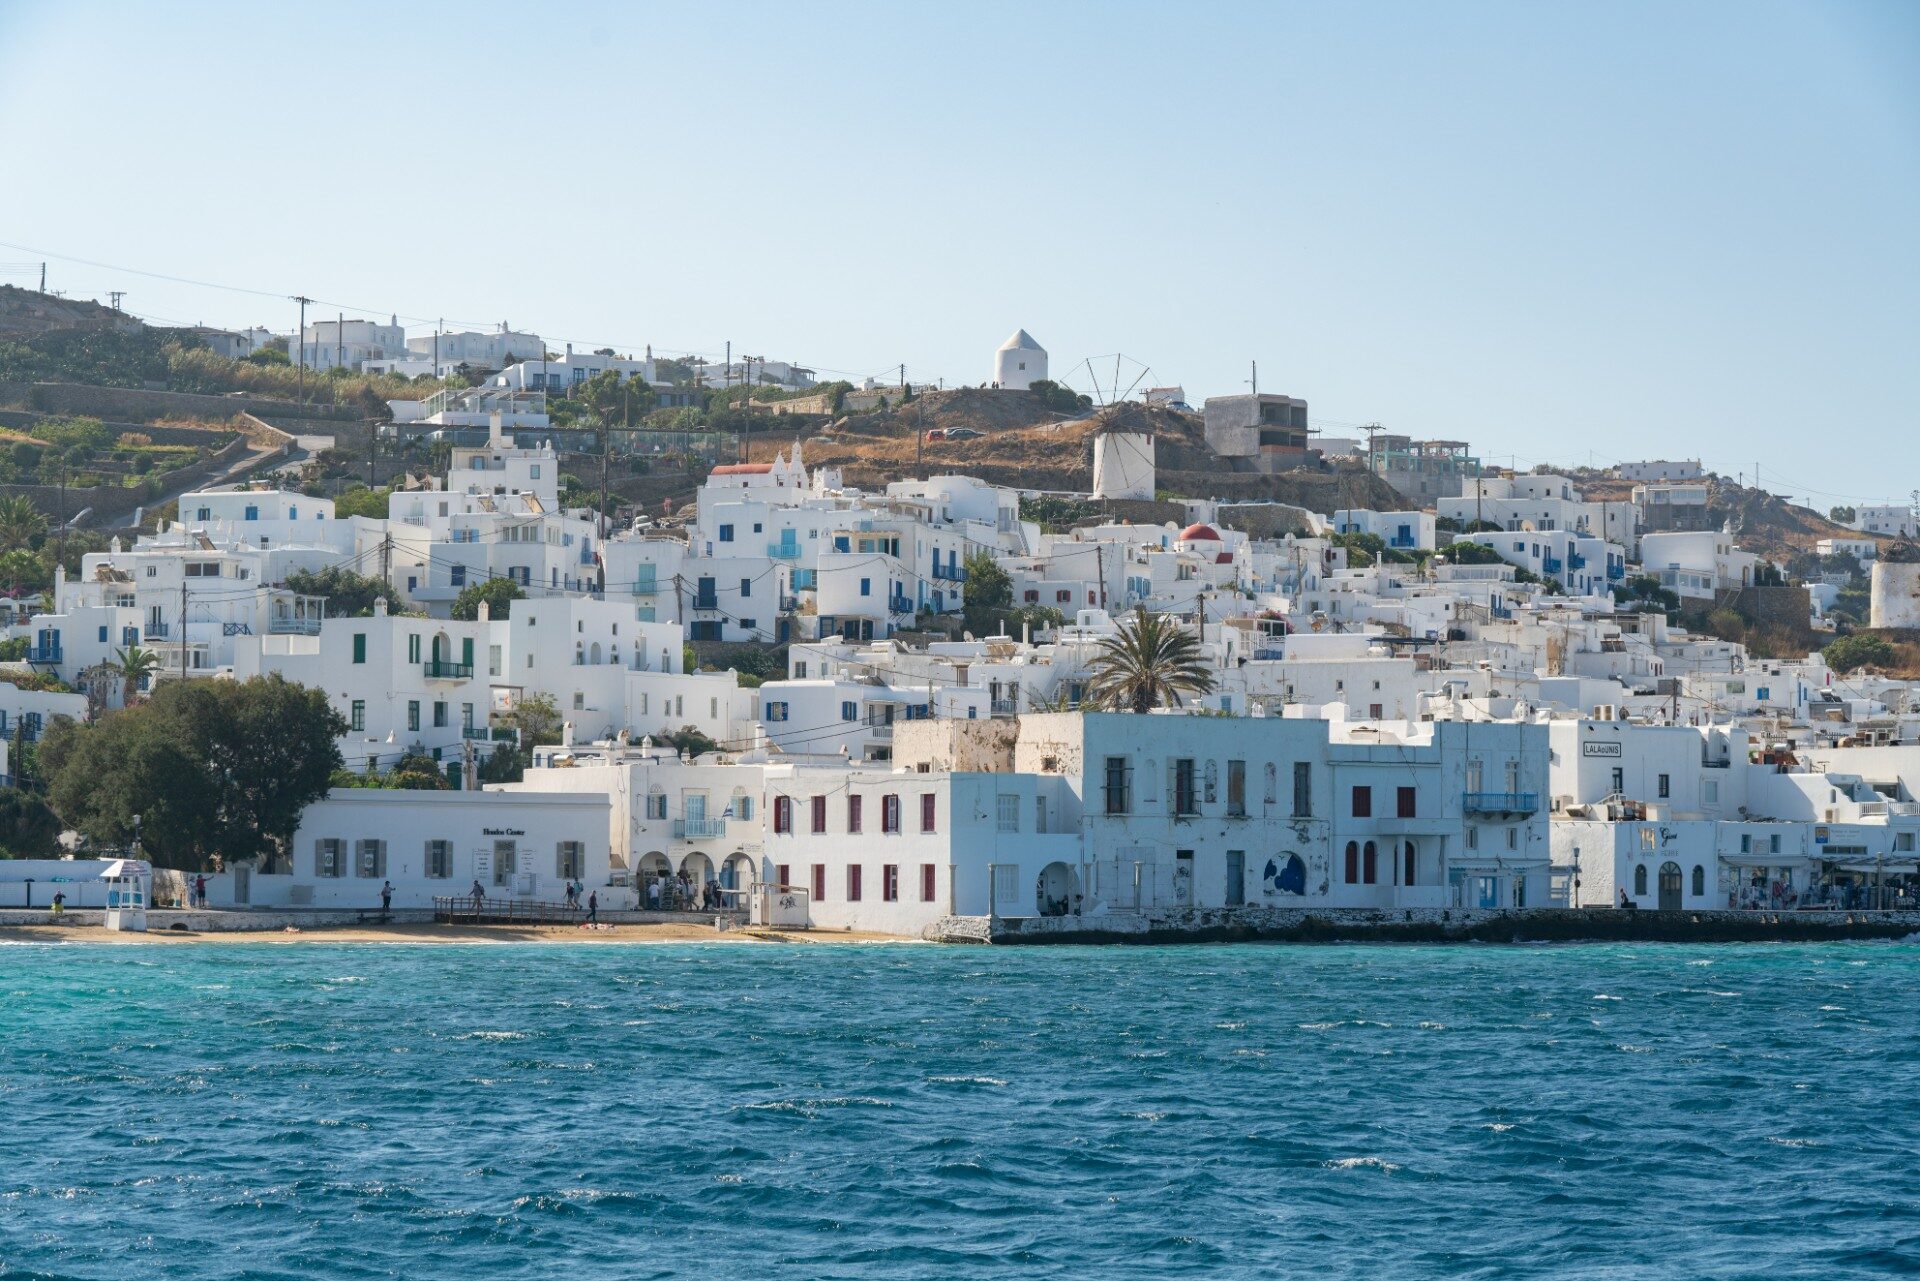 Mykonos, Greece: Travel Guide to 3 Days on the Island